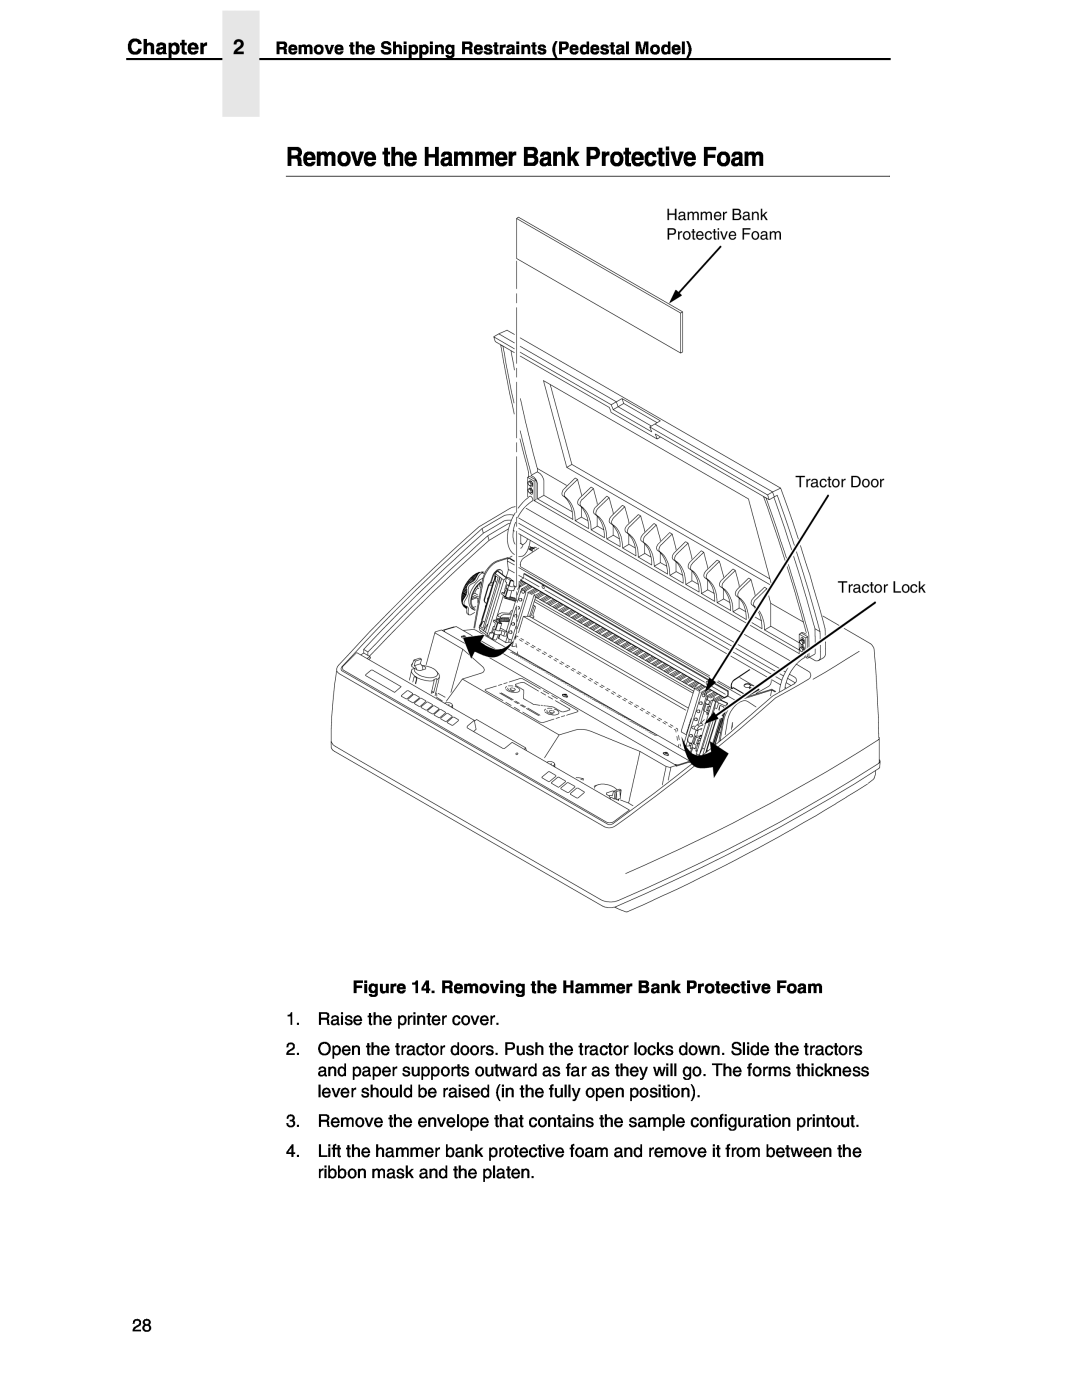 Compaq P5000 Series setup guide Remove the Hammer Bank Protective Foam, Remove the Shipping Restraints Pedestal Model 